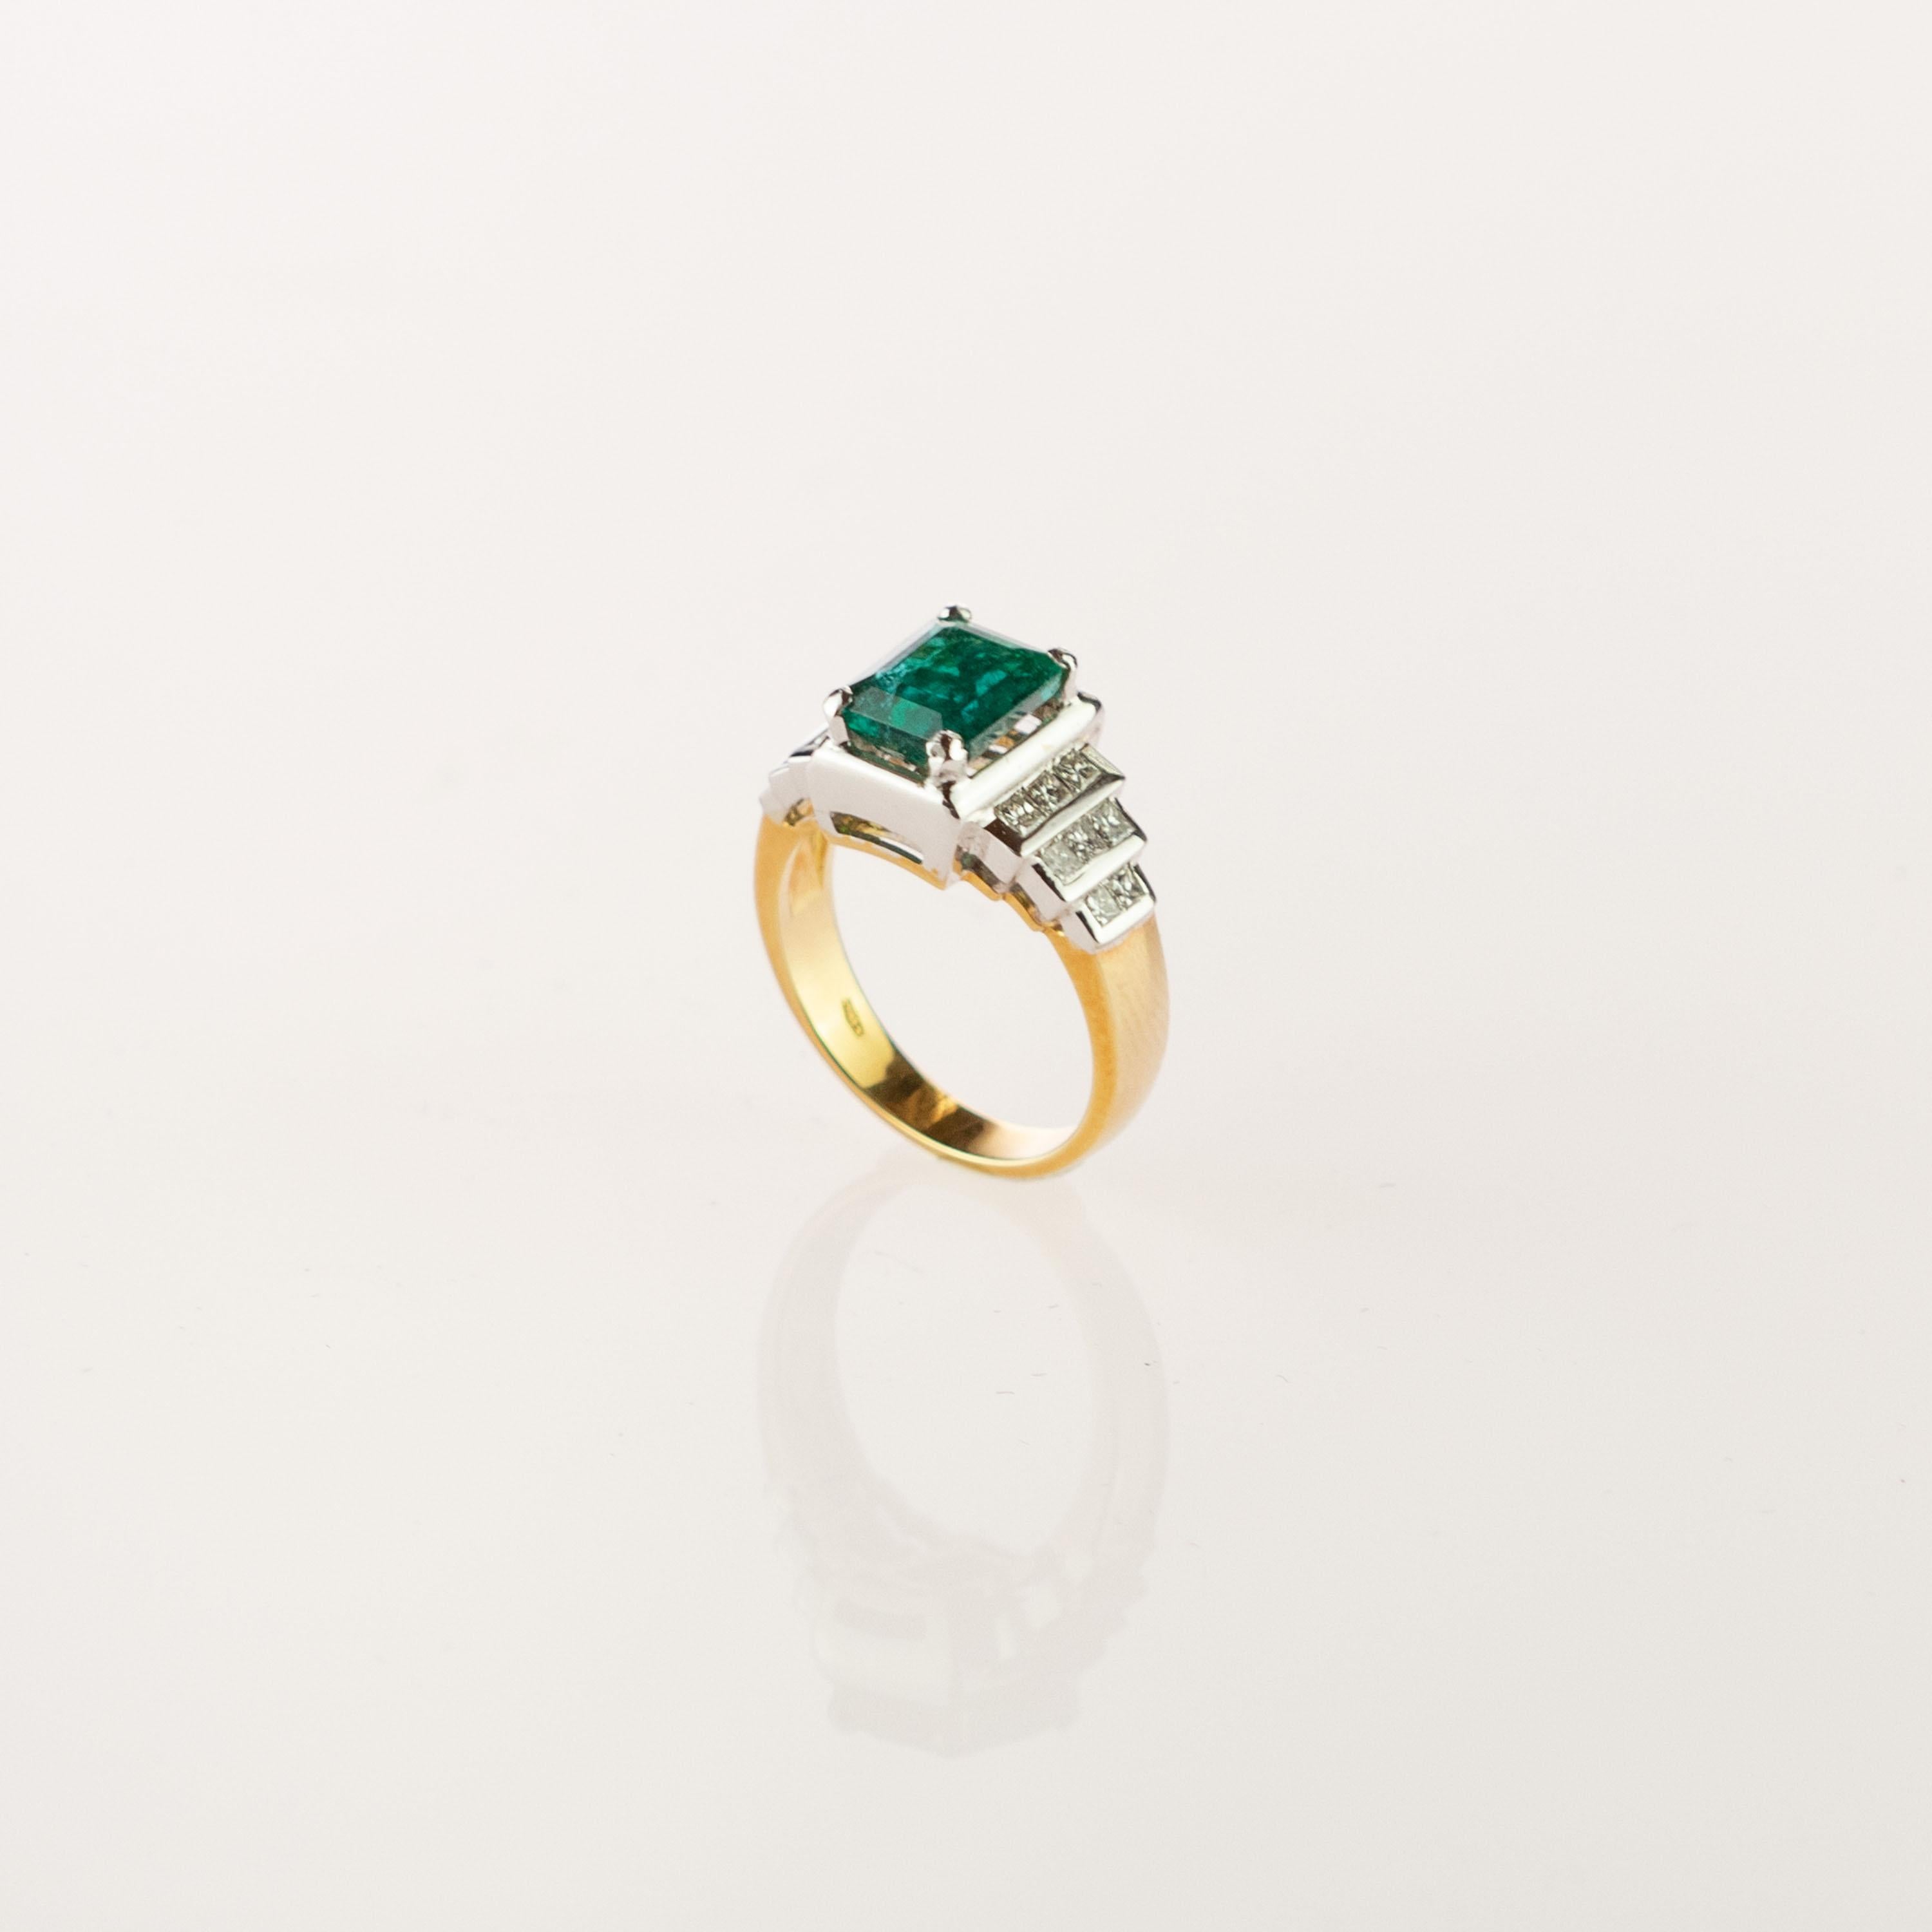 Wondrous and stunnig jewel piece pyramid shaped with 16 diamonds, Colombian Emerald (2.55 carat) and white gold rungs. Setted in an elegant yellow gold round ring that creates a contrast full of color and elegance. Cocktail ring with a AIG Certified